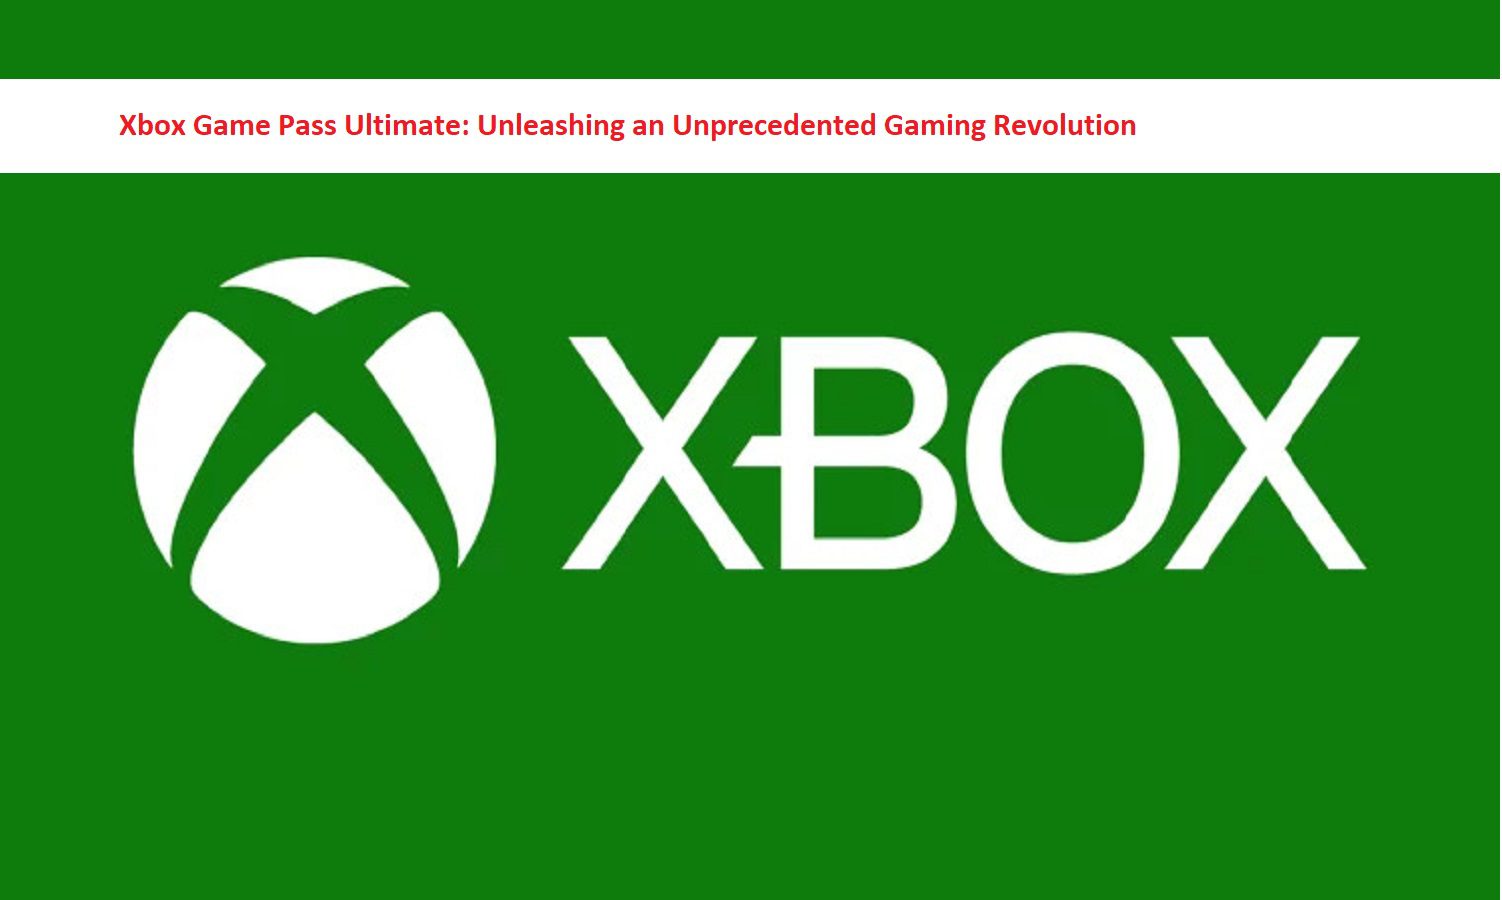 Xbox Game Pass Ultimate: Unleashing an Unprecedented Gaming Revolution